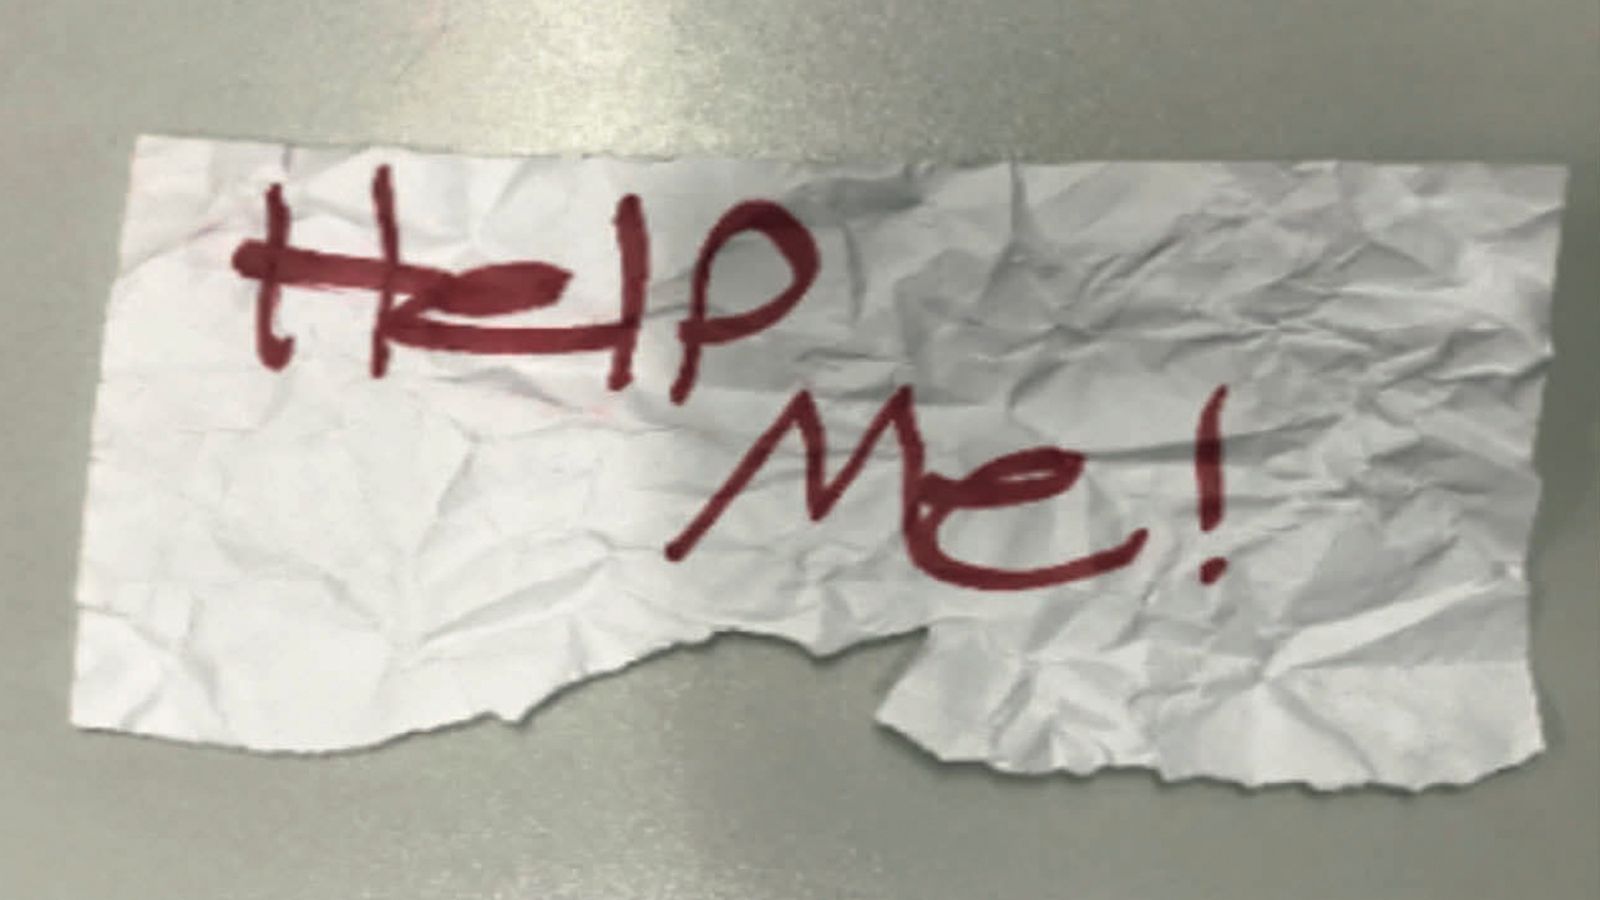 Kidnapped 13-year-old girl rescued after holding 'Help Me!' note in captor's car